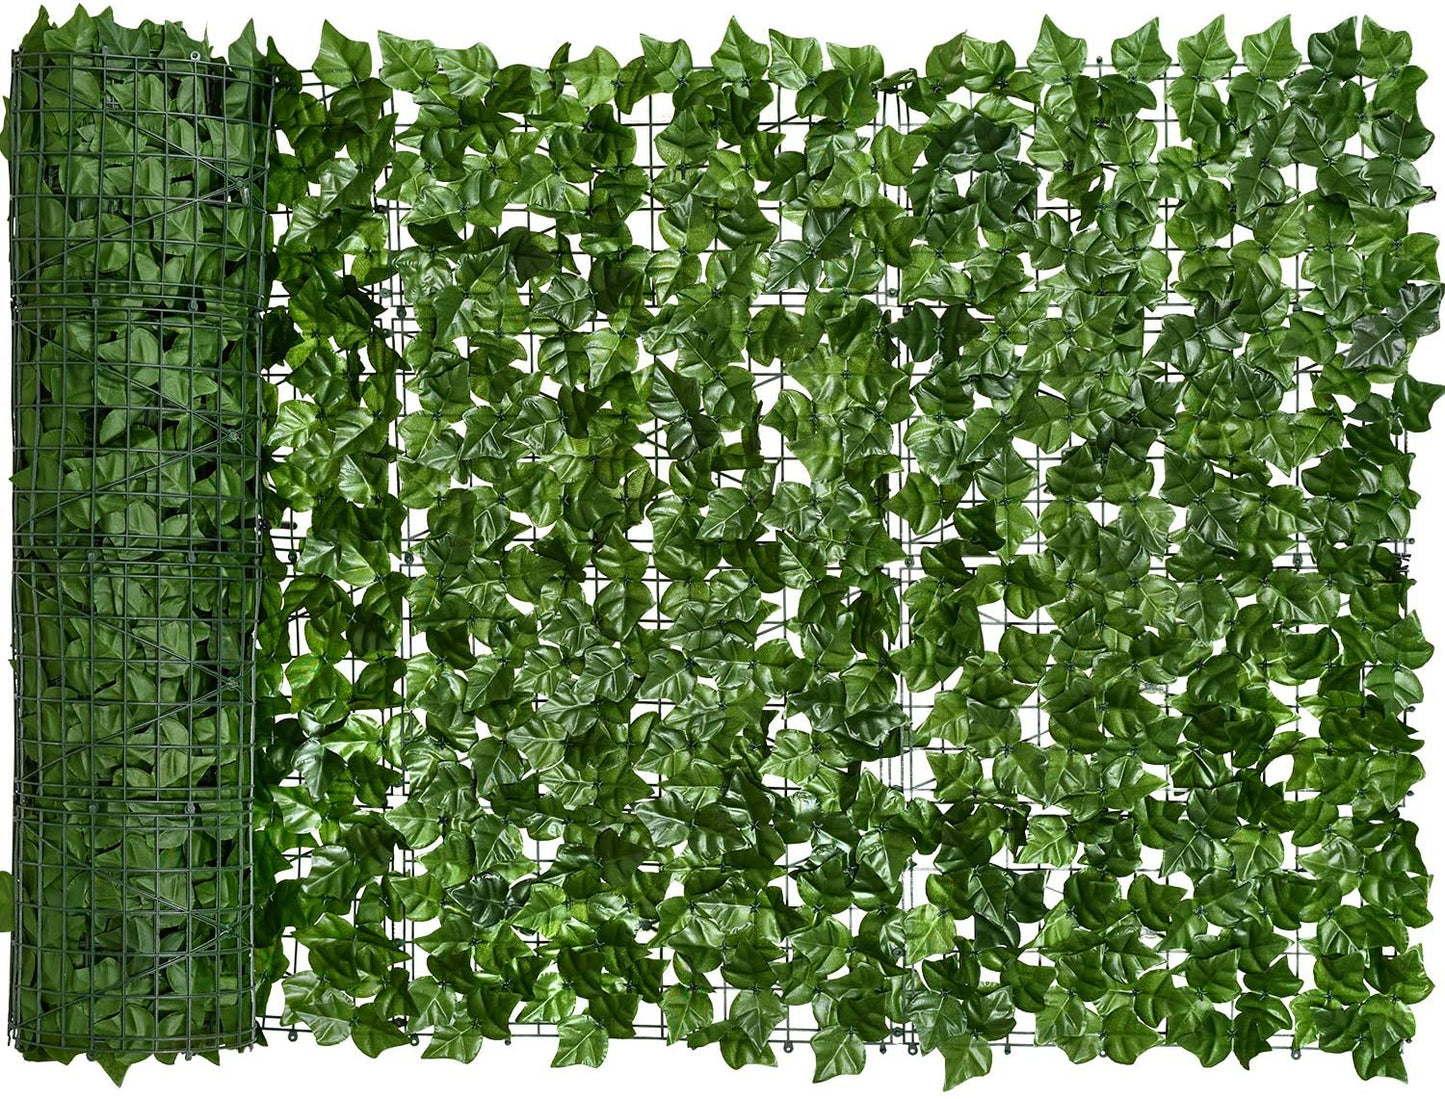 Artificial Ivy Privacy Fence Screen, Artificial Hedges Fence and Faux Ivy Vine Leaf Decoration for Outdoor Decor, Garden (1.5 X 2.5 Meter)